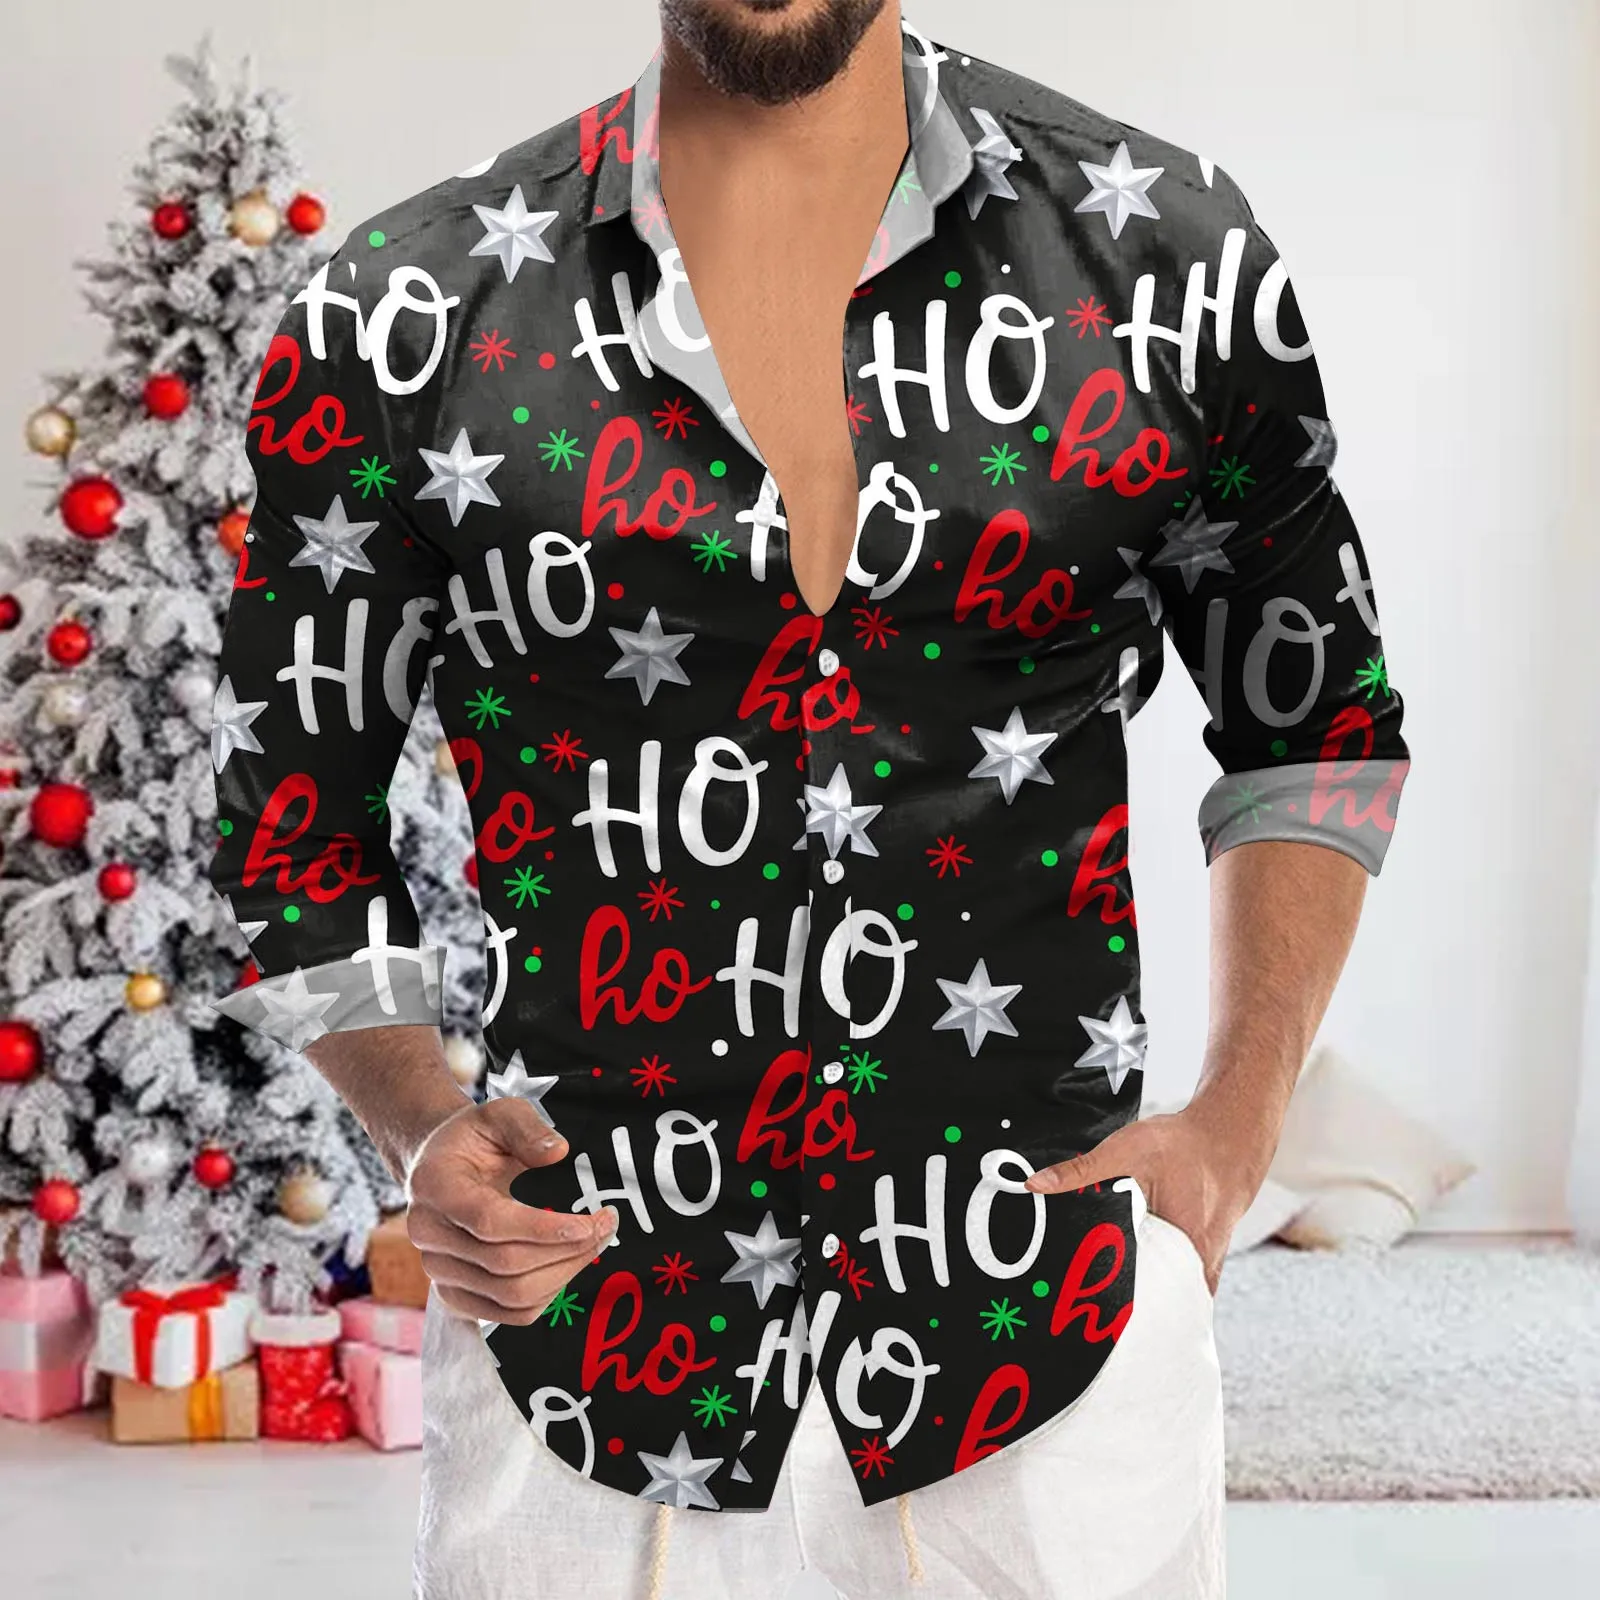 Mens Christmas Shirts Letter Printed Long Sleeve Turn Down Collar Blouse Xmas Fitness Stylish Business Xmas Party Shirts Male